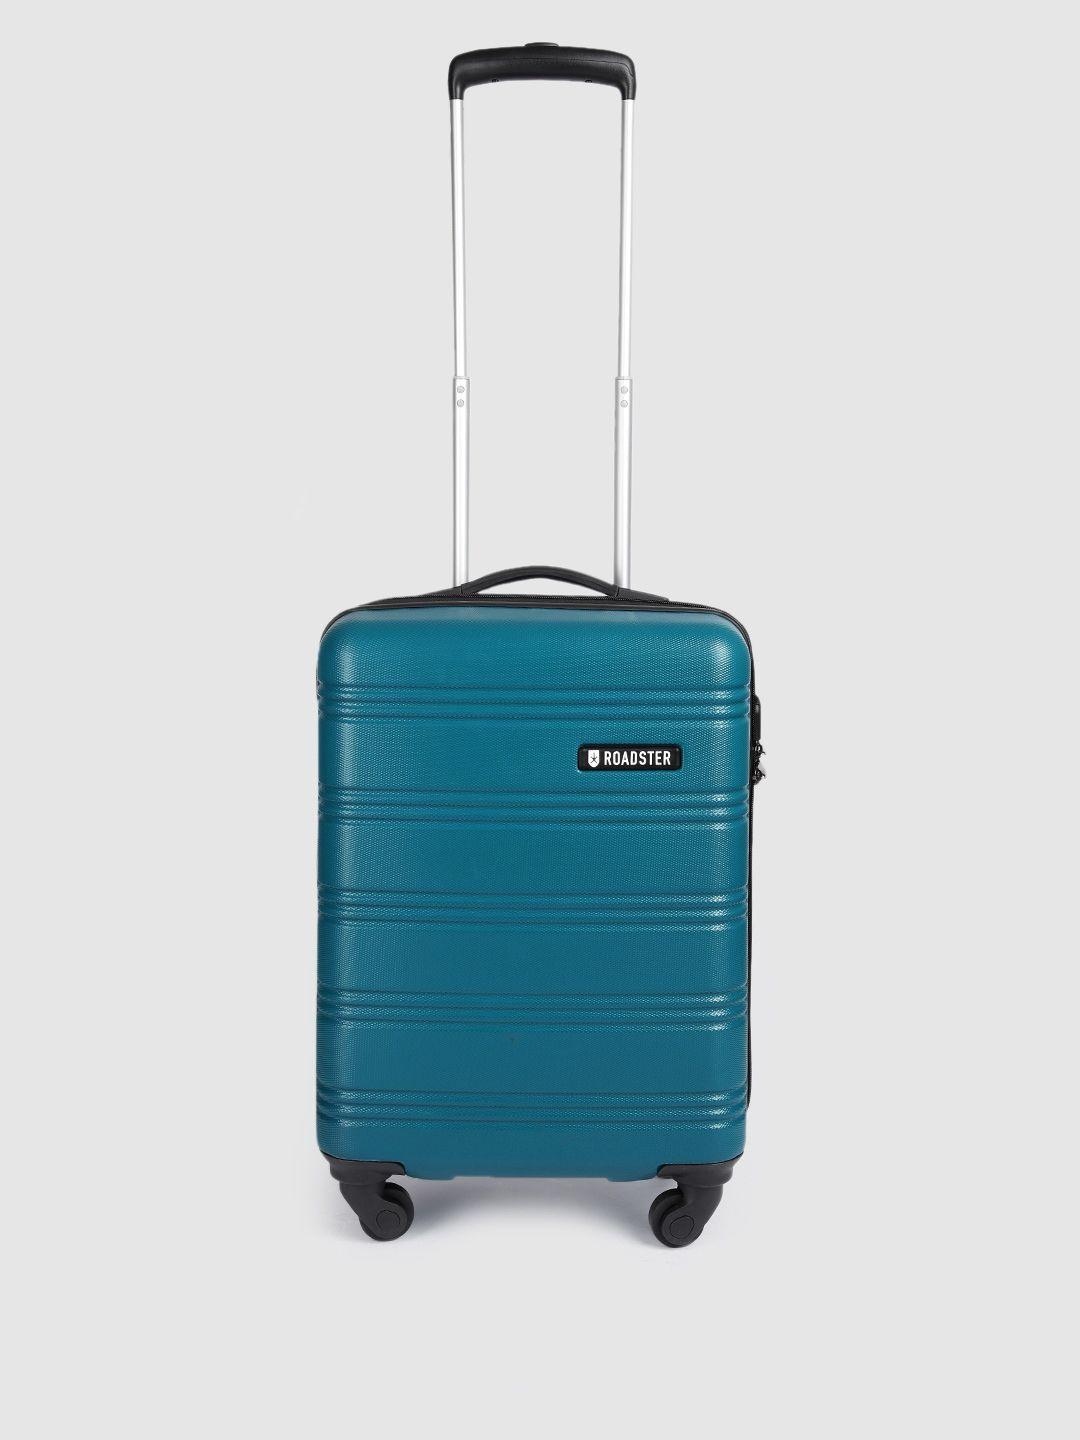 roadster textured hard-sided cabin trolley suitcase